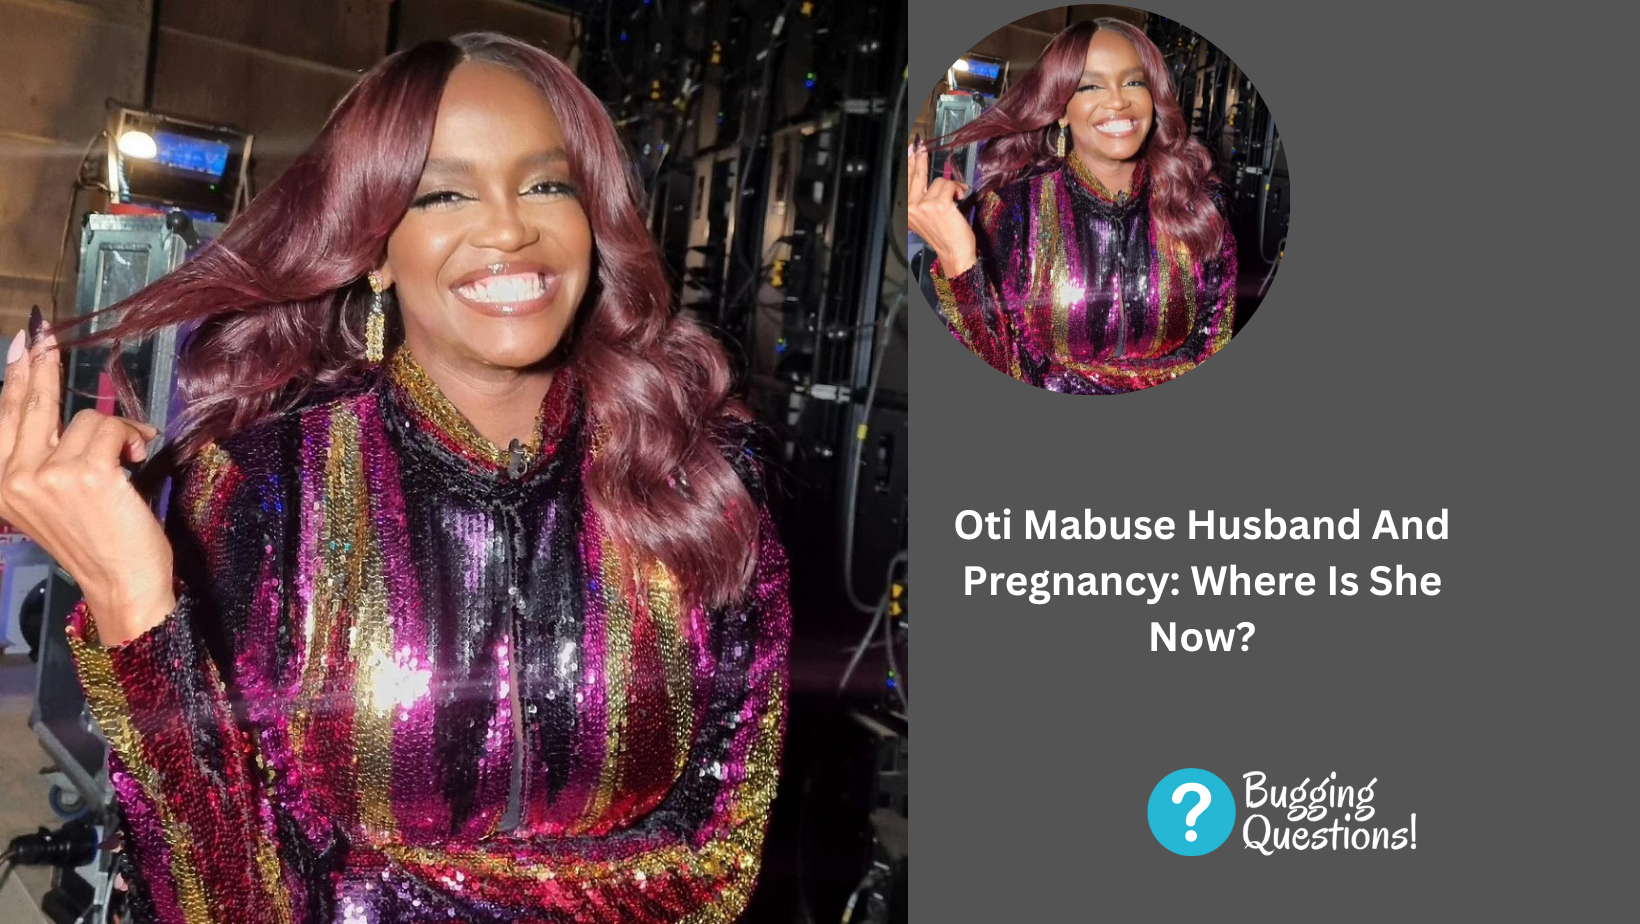 Oti Mabuse Husband And Pregnancy: Where Is She Now? More Details About Her Family